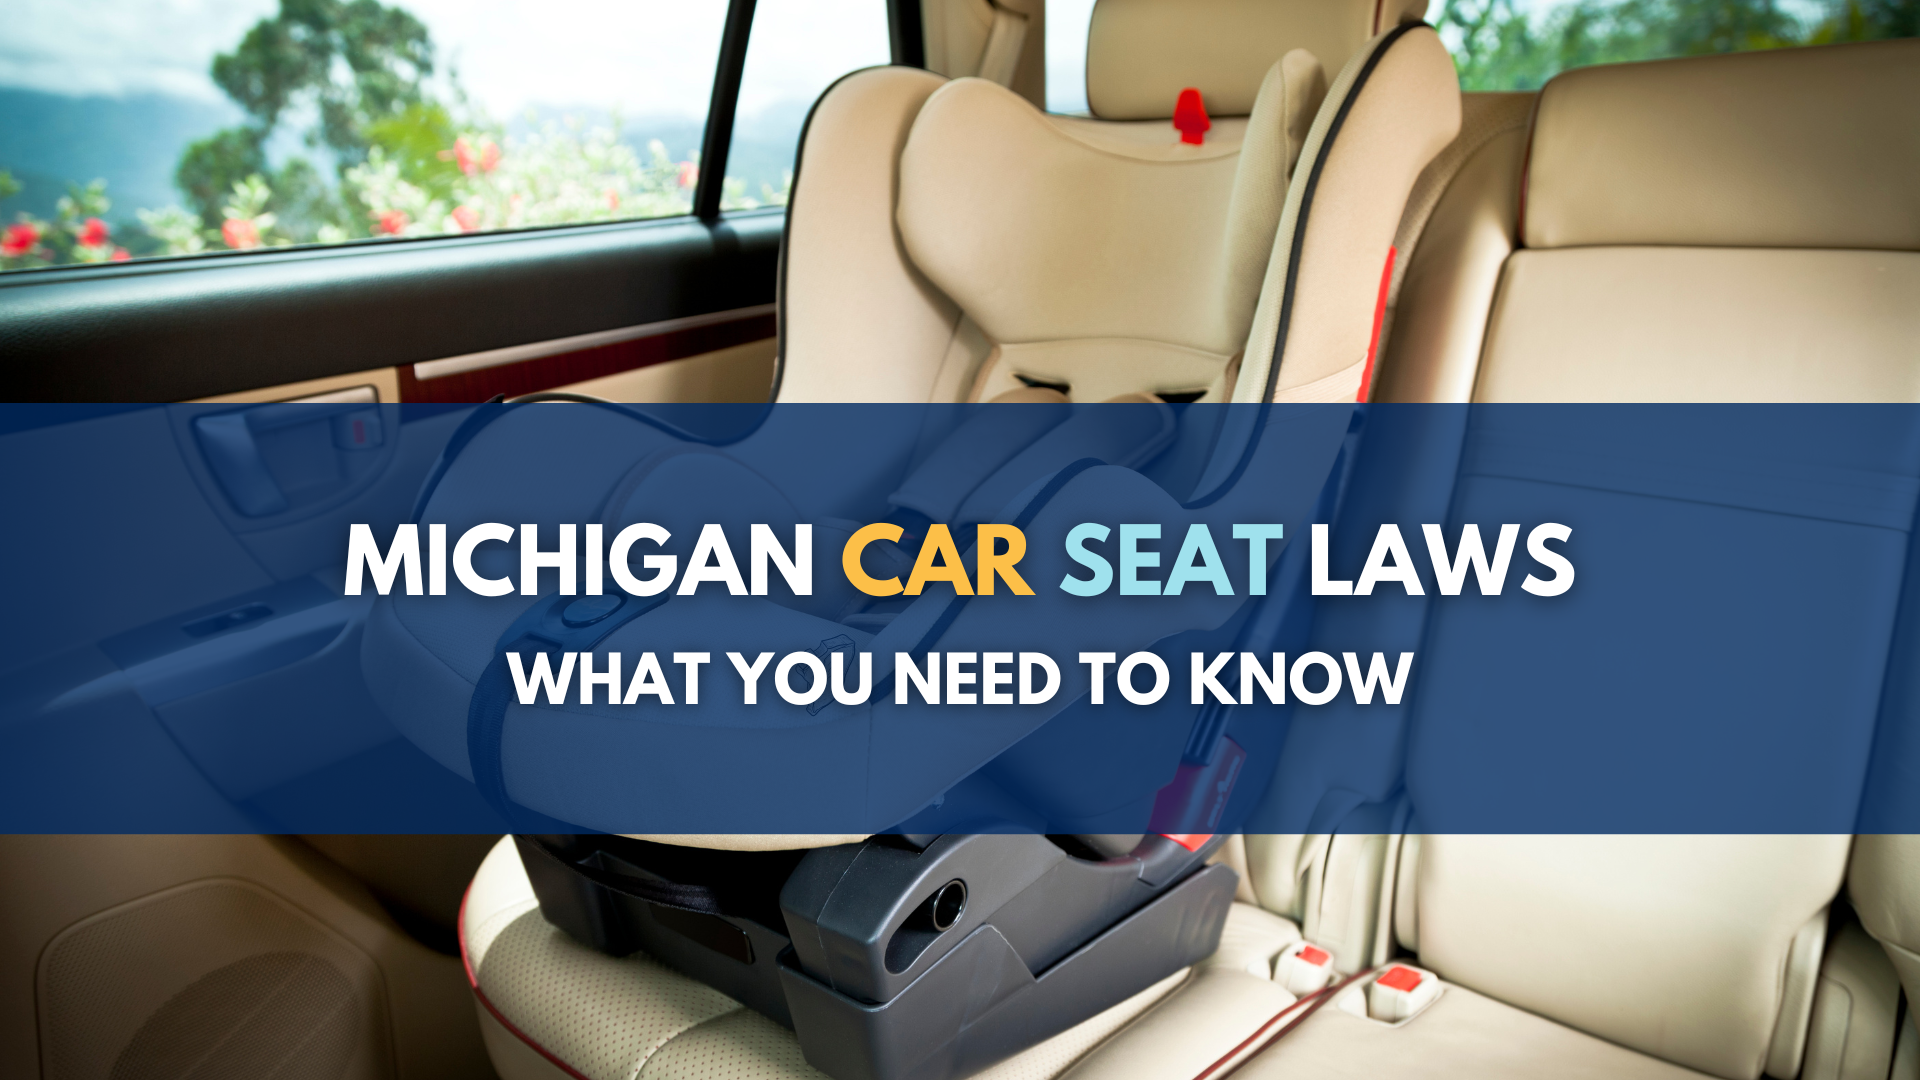 Michigan Car Seat Laws: What you need to know